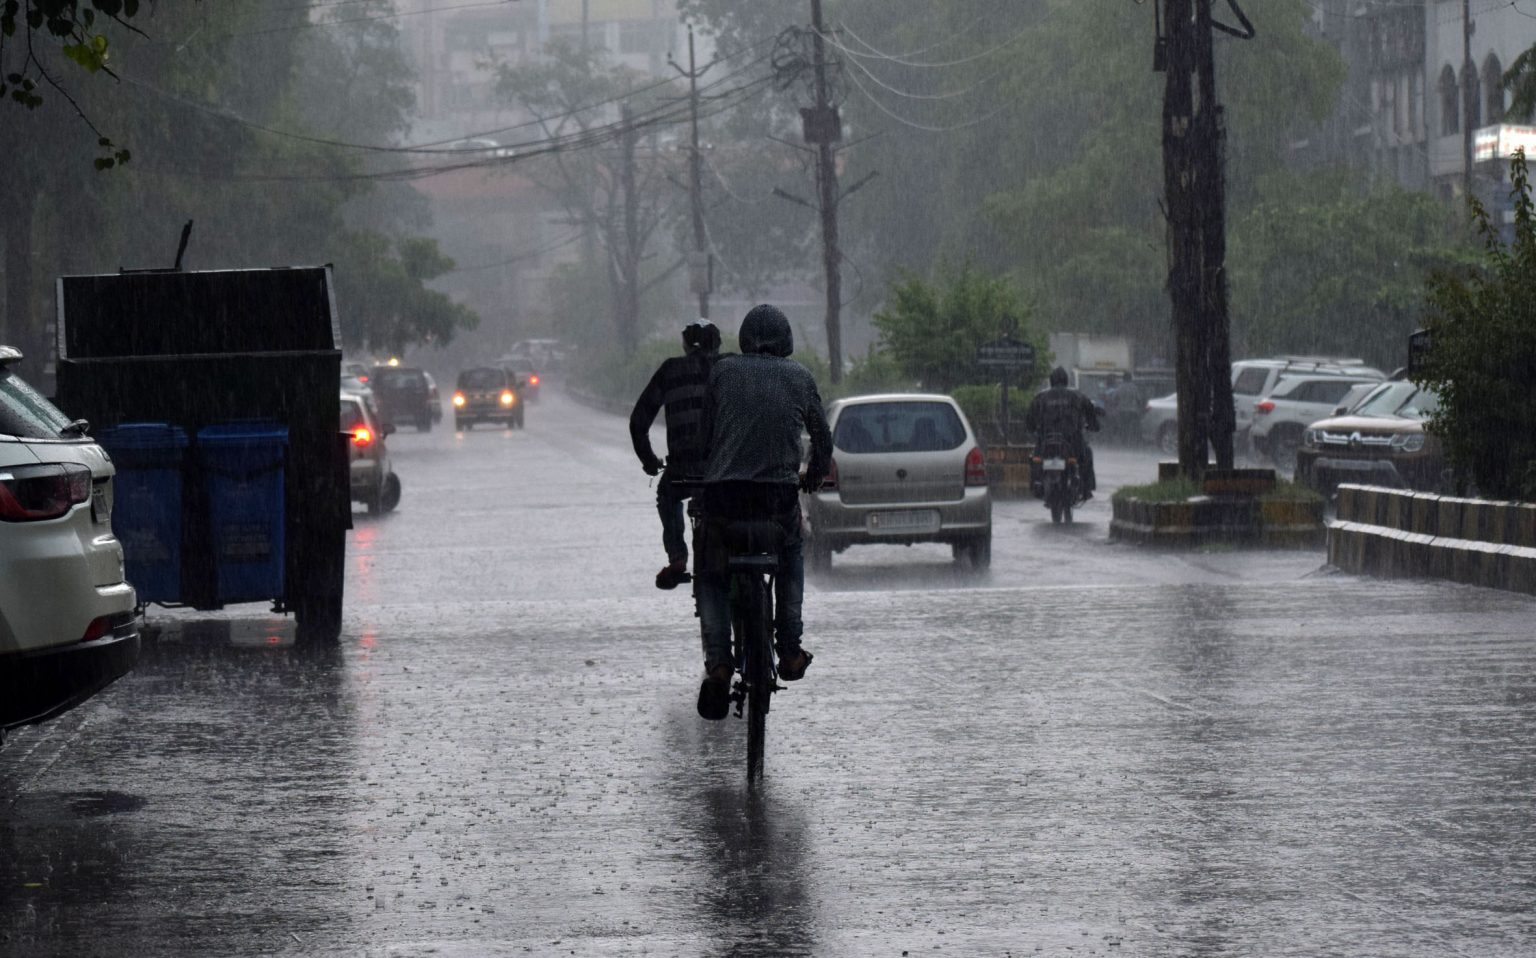 Rains bring cool respite in Nagpur, heavy downpour likely on Friday